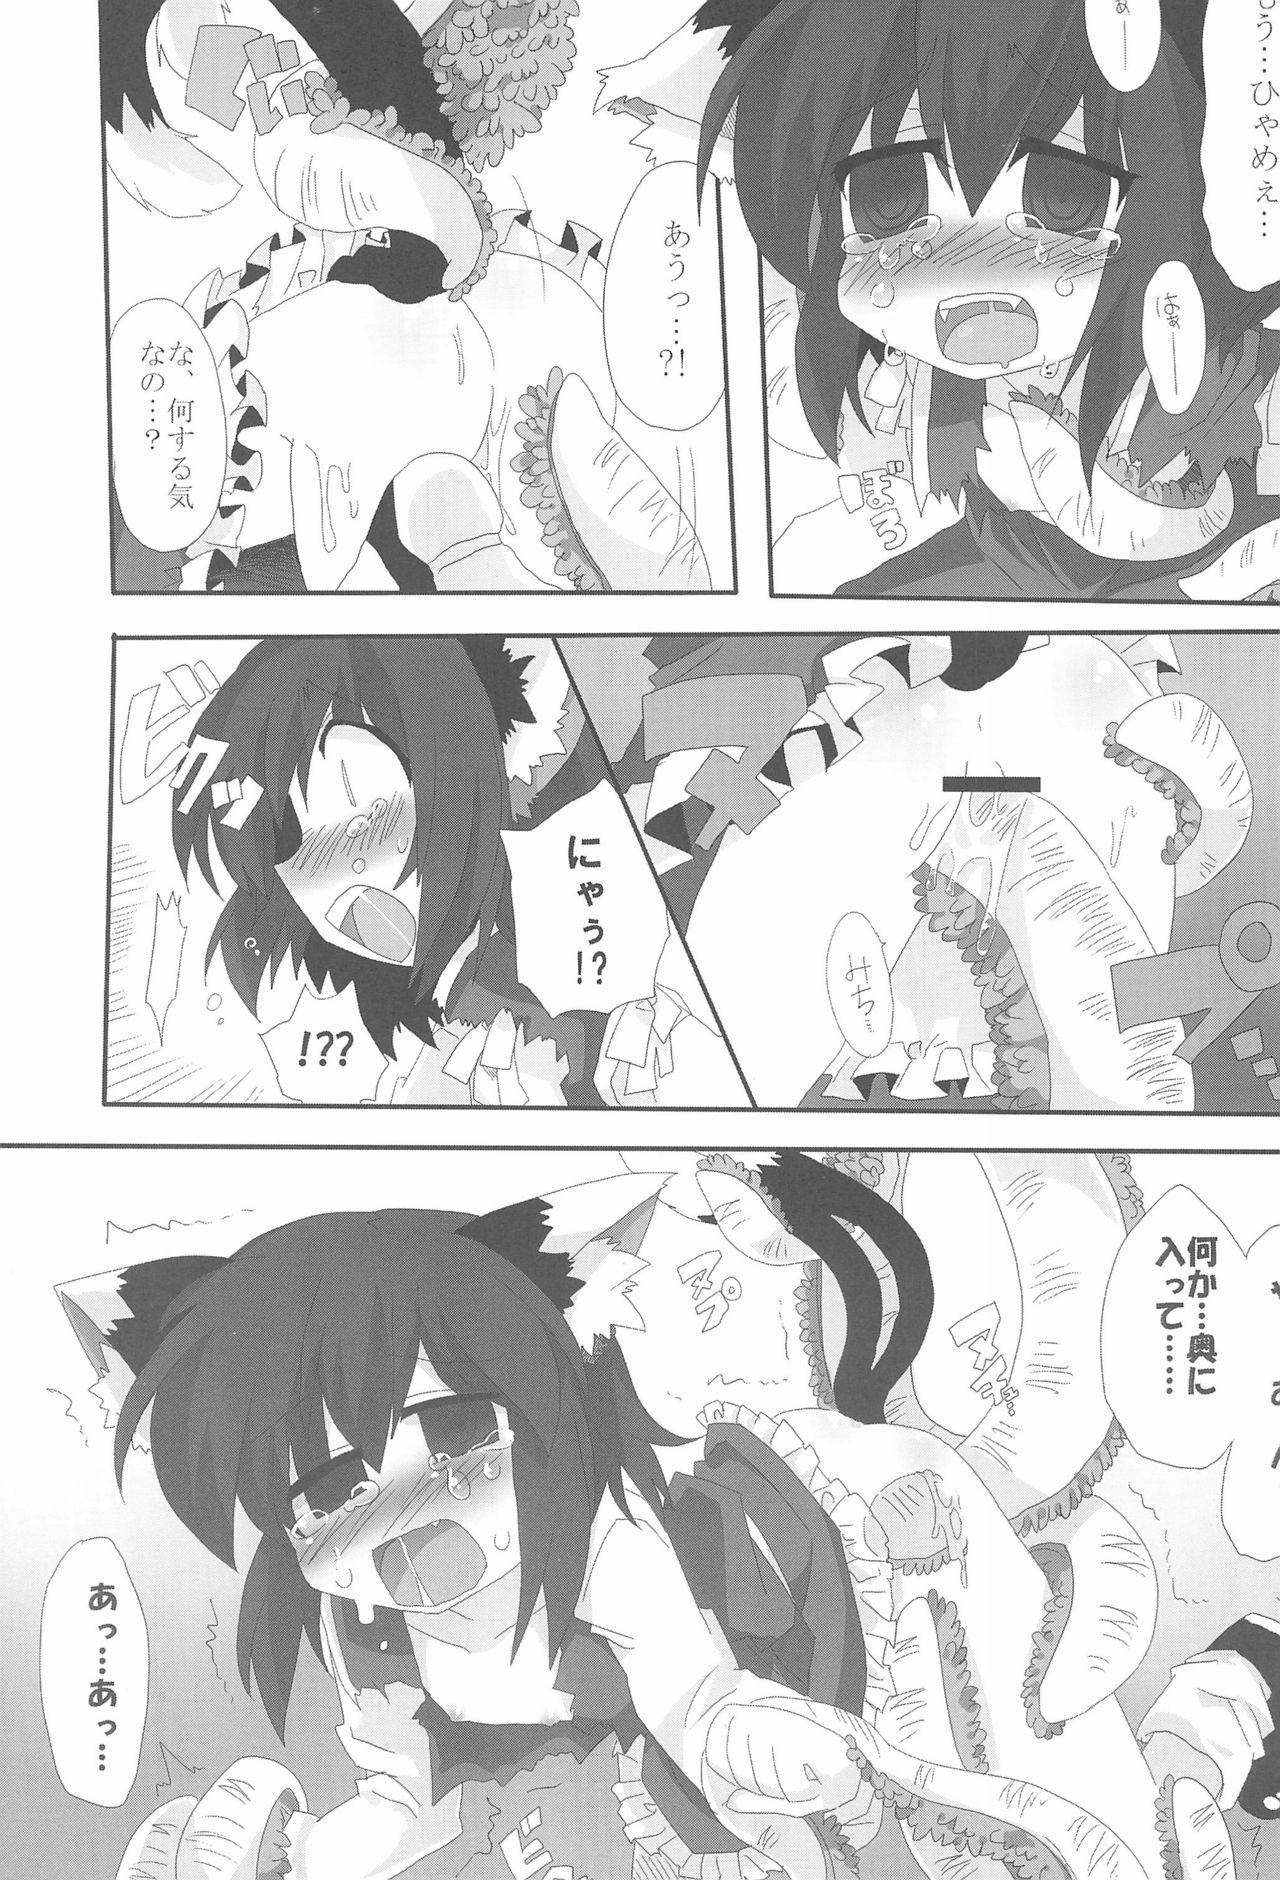 Assfingering NYAS! ATTRACTION - Touhou project Chaturbate - Page 11